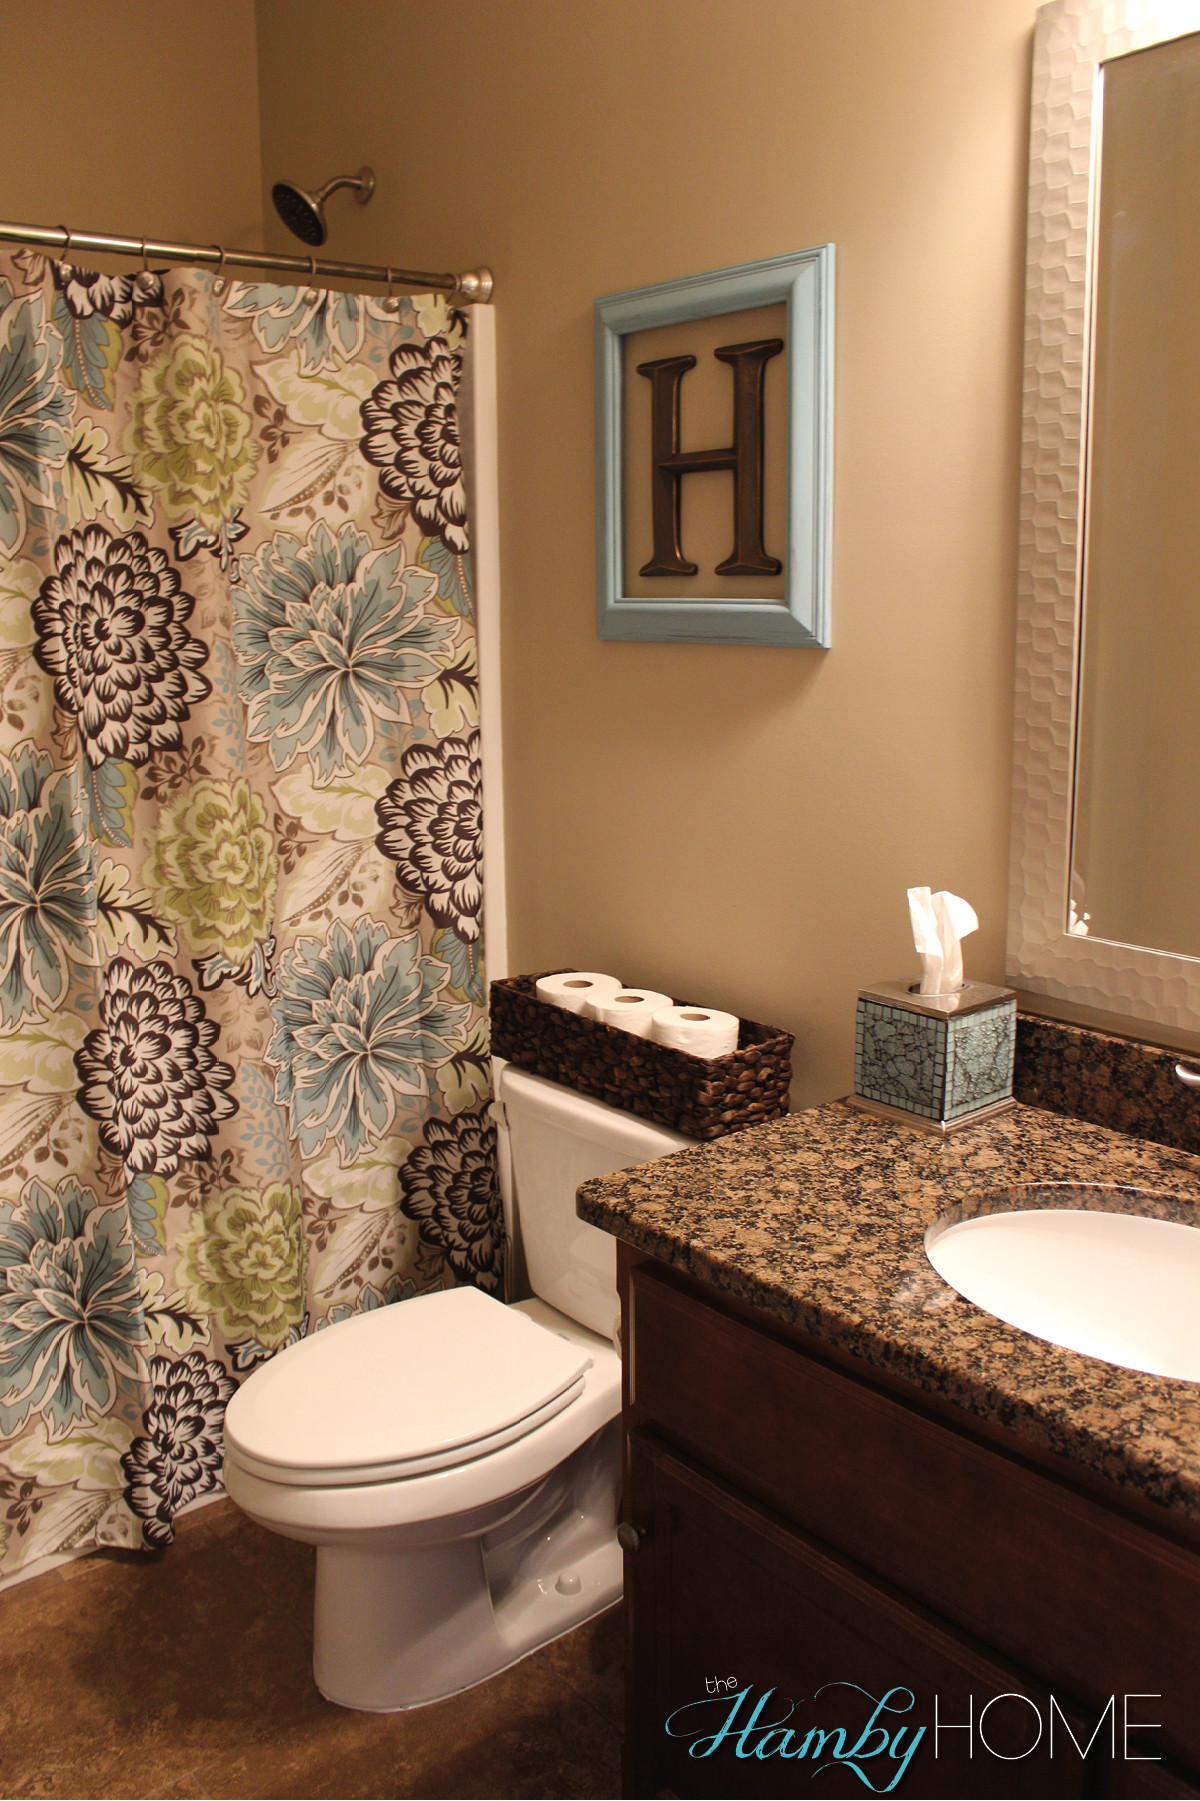 Bathroom Decor Pictures
 TGIF House Tour Guest Bathroom The Hamby Home